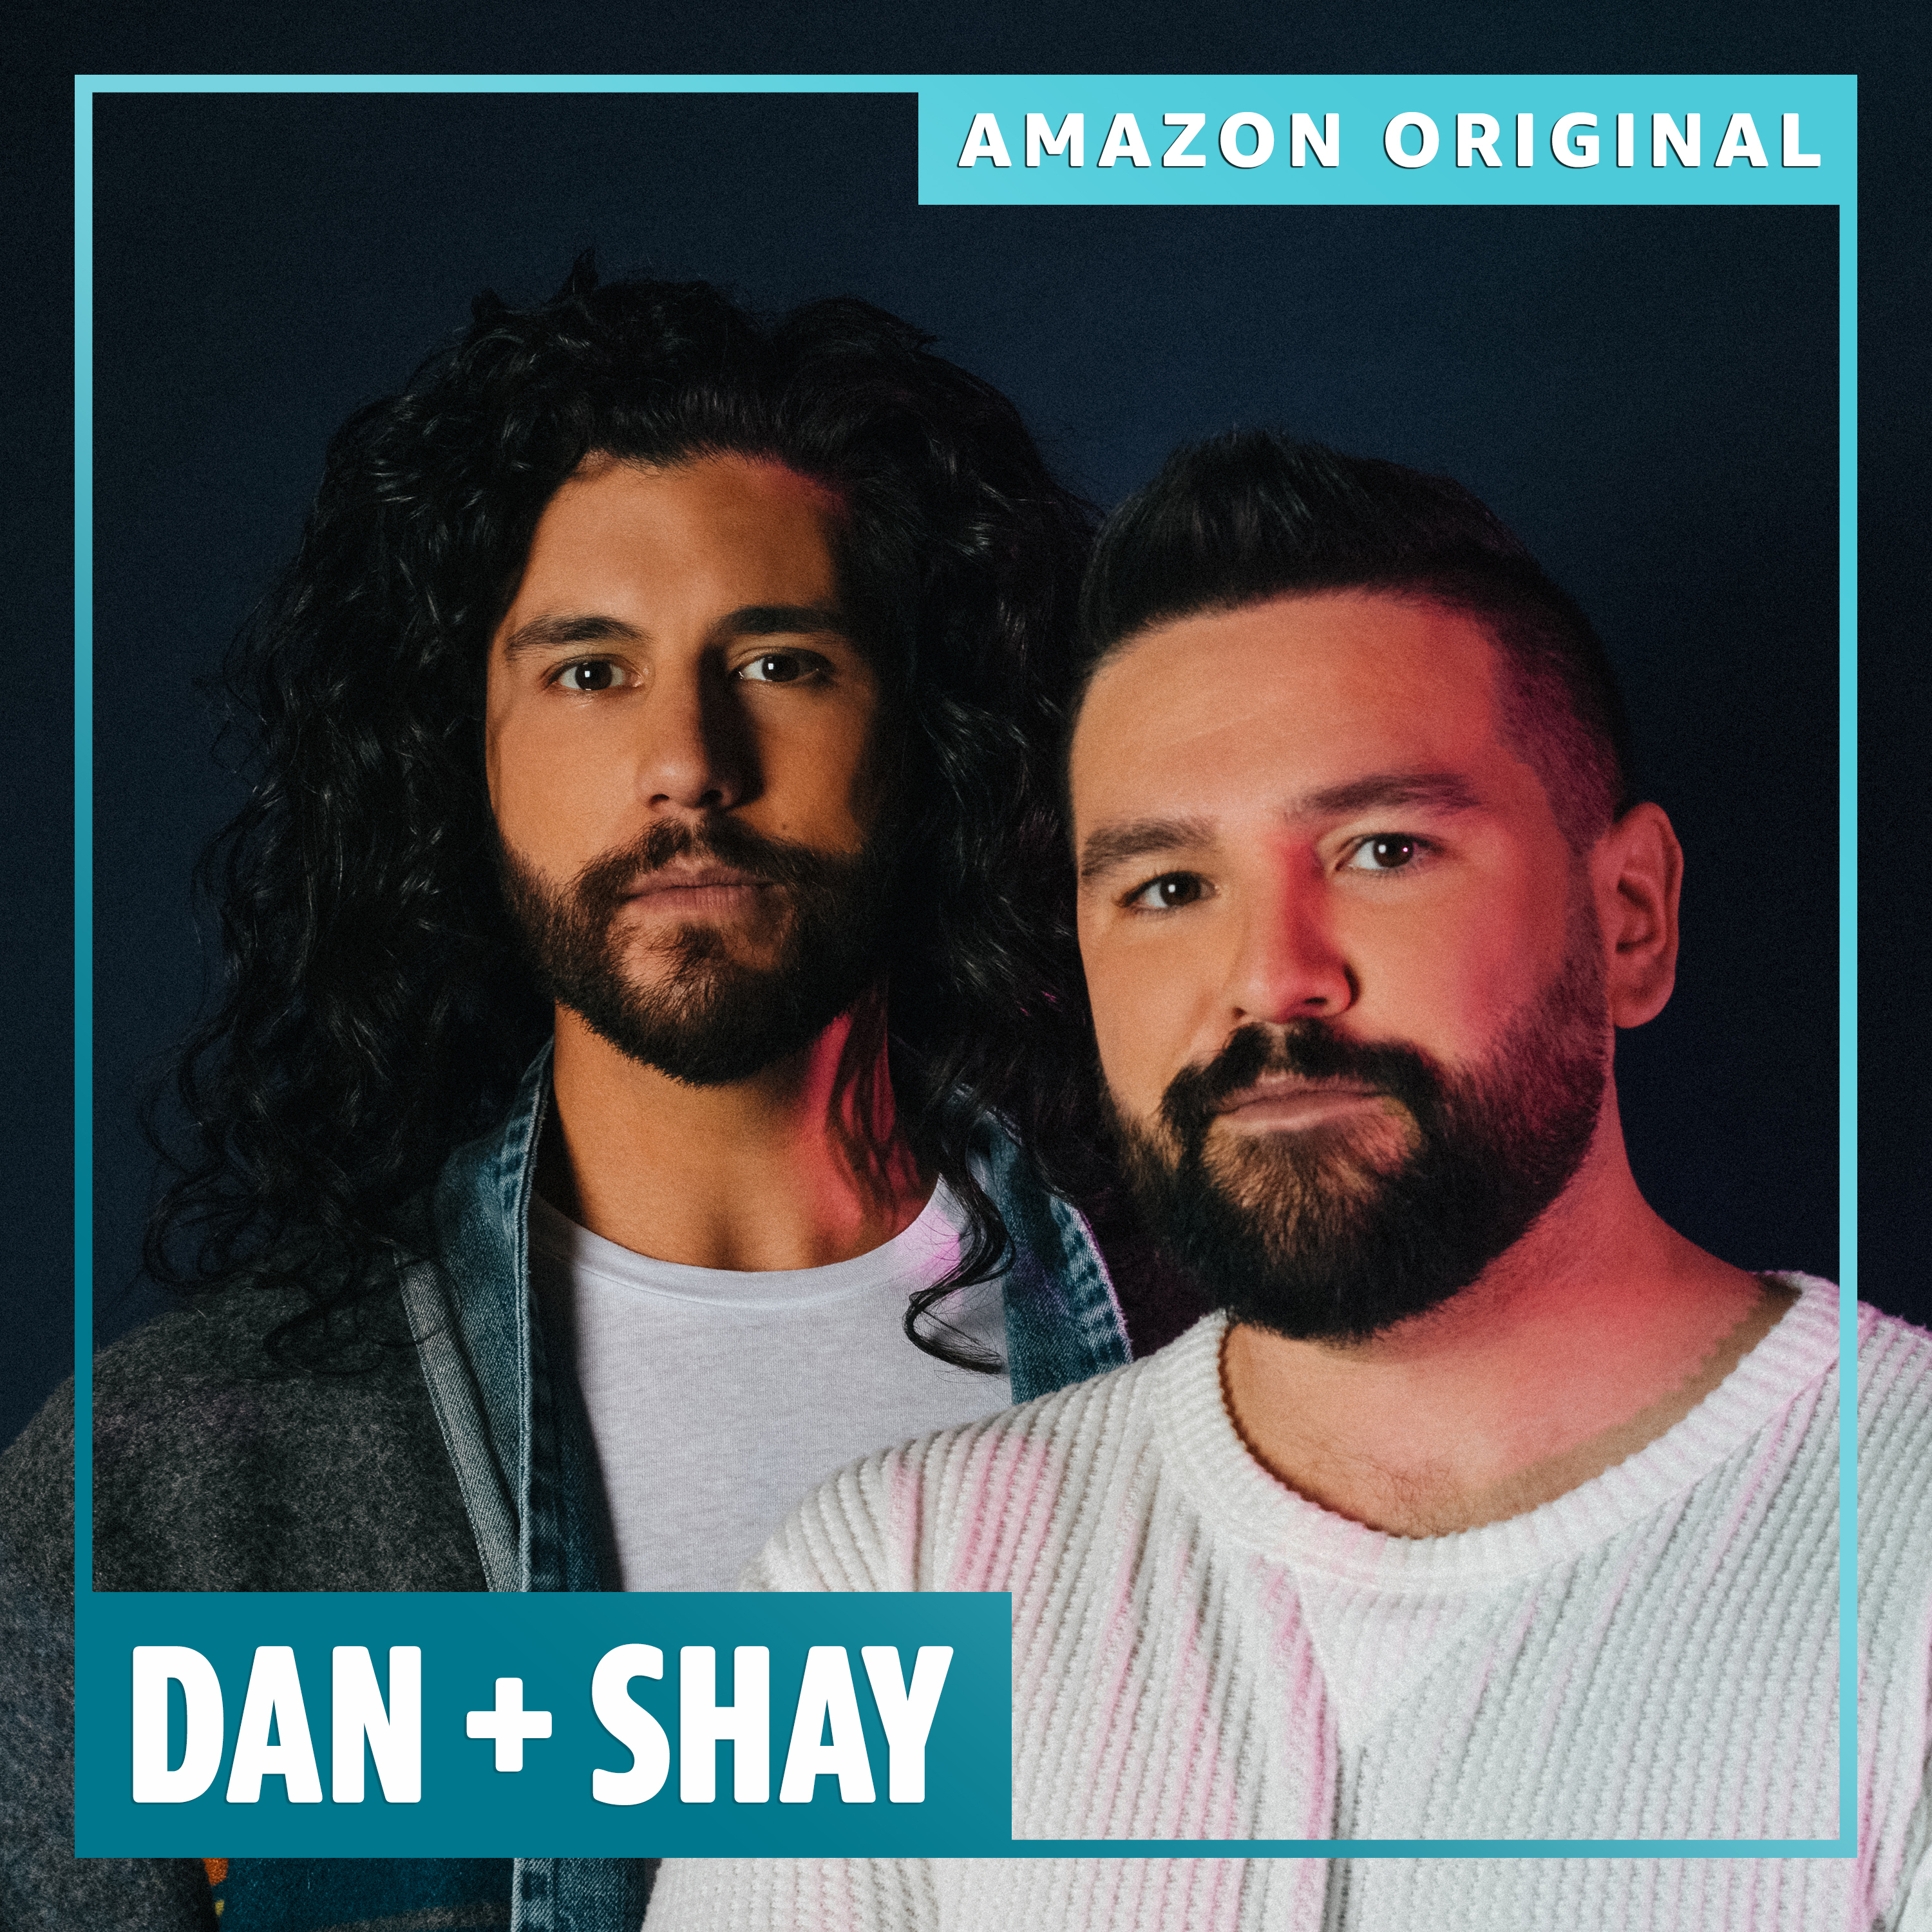 THE HOLIDAYS ARE HERE ON AMAZON MUSIC WITH AN EXCLUSIVE NEW CHRISTMAS SONG FROM DAN + SHAY